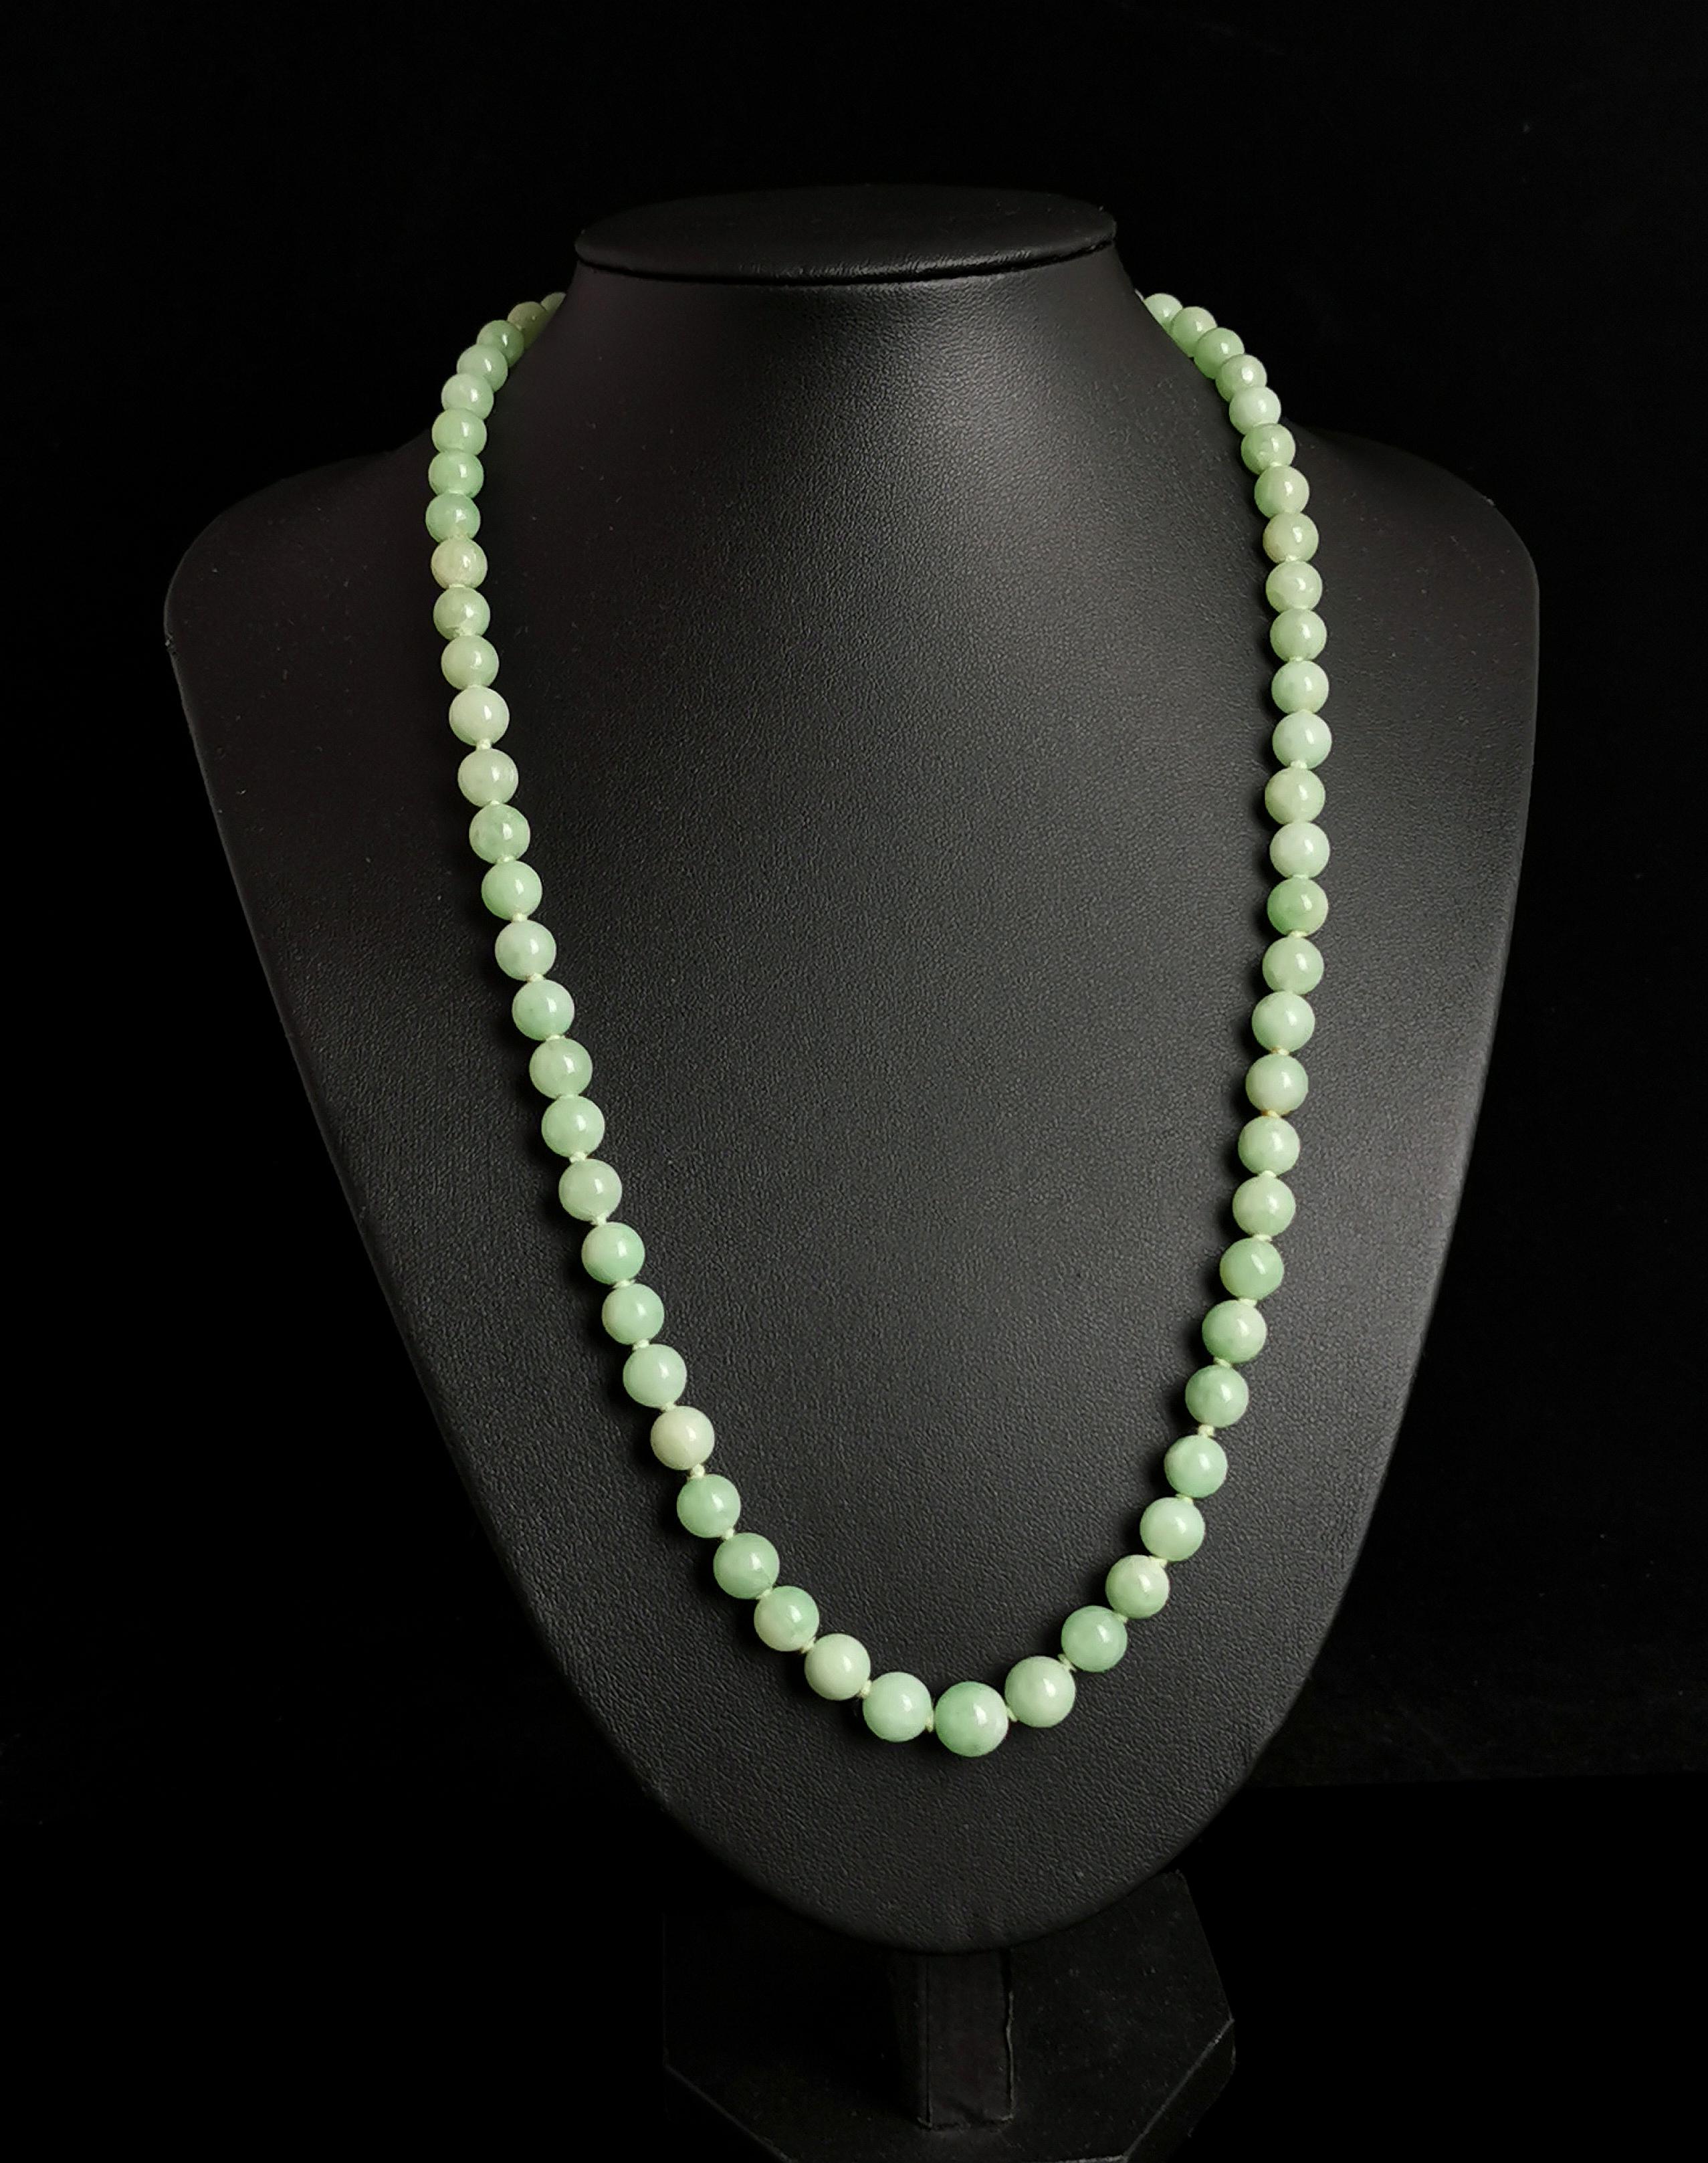 A beautiful vintage Art Deco era Jadeite Jade bead necklace.

Lovely apple green beads, with beautiful variations in the colourway from almost white to darker streaks, all delicately hand shaped and tightly knotted onto a cotton thread.

The beads